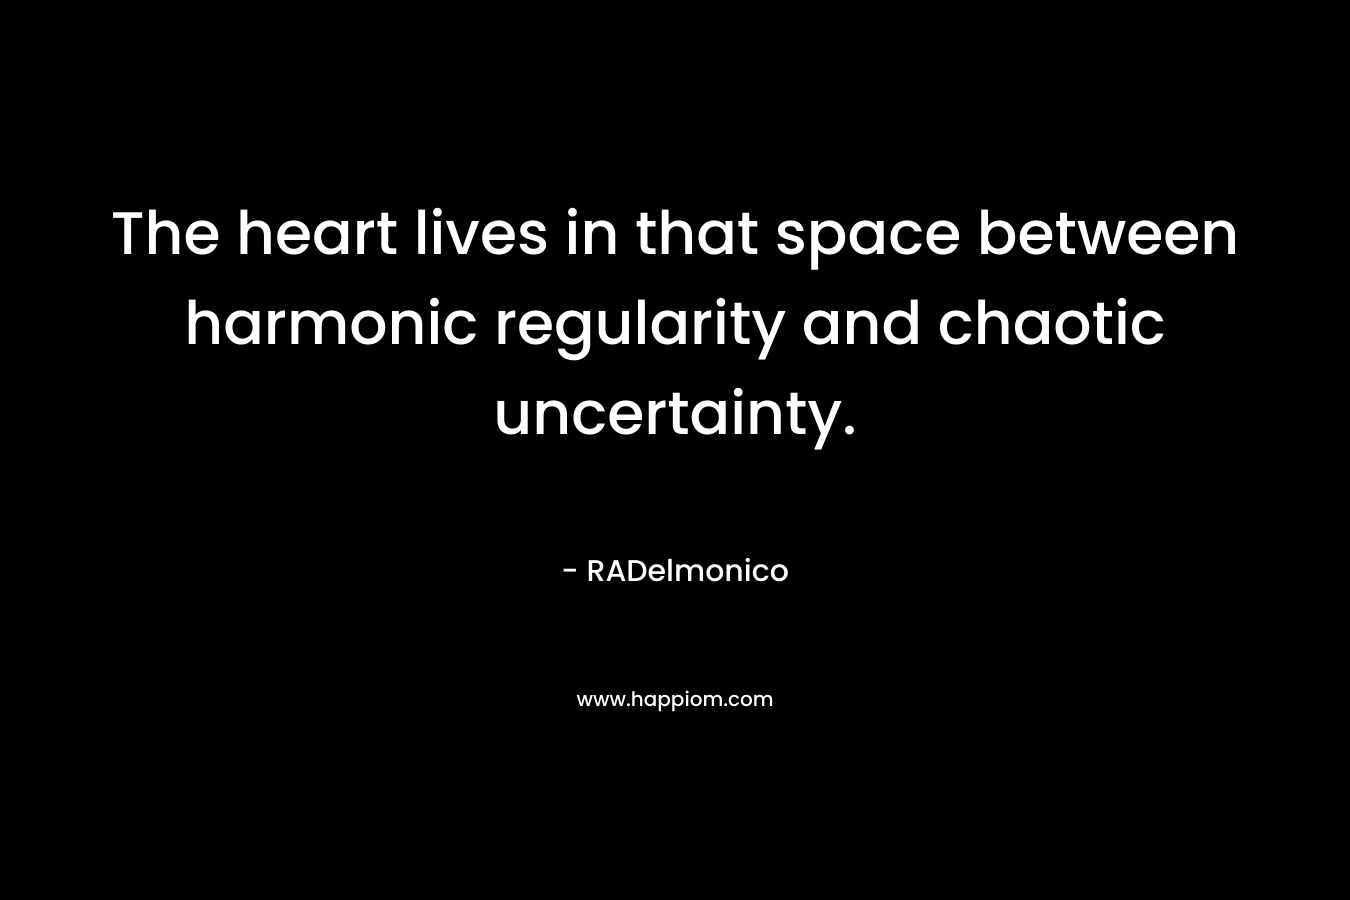 The heart lives in that space between harmonic regularity and chaotic uncertainty.